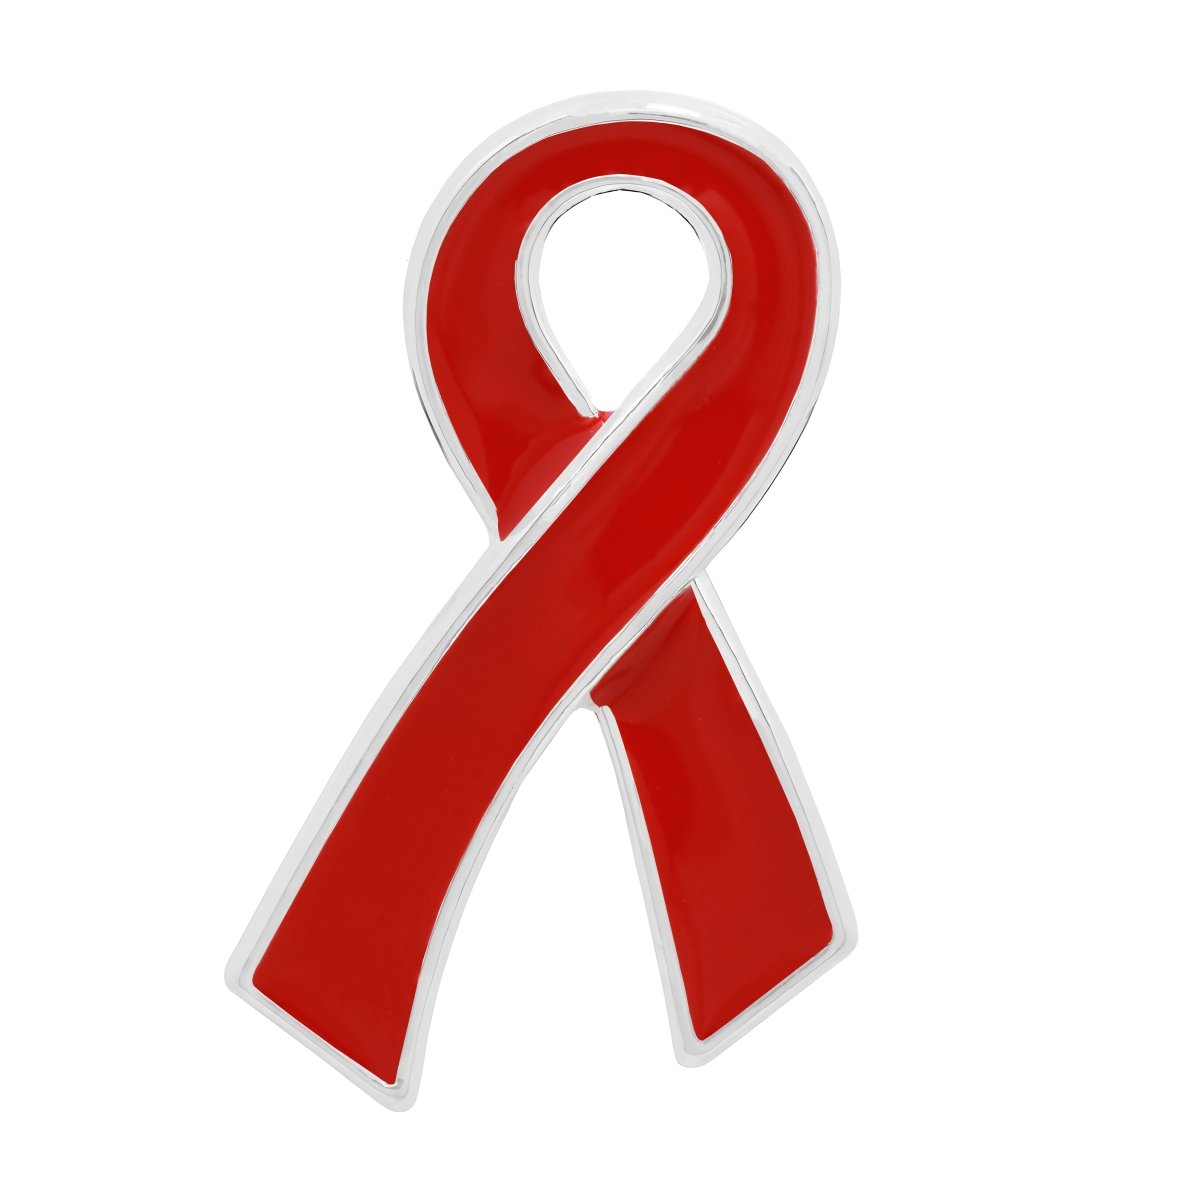 AIDS HIV Awareness Ribbon Pins - Fundraising For A Cause